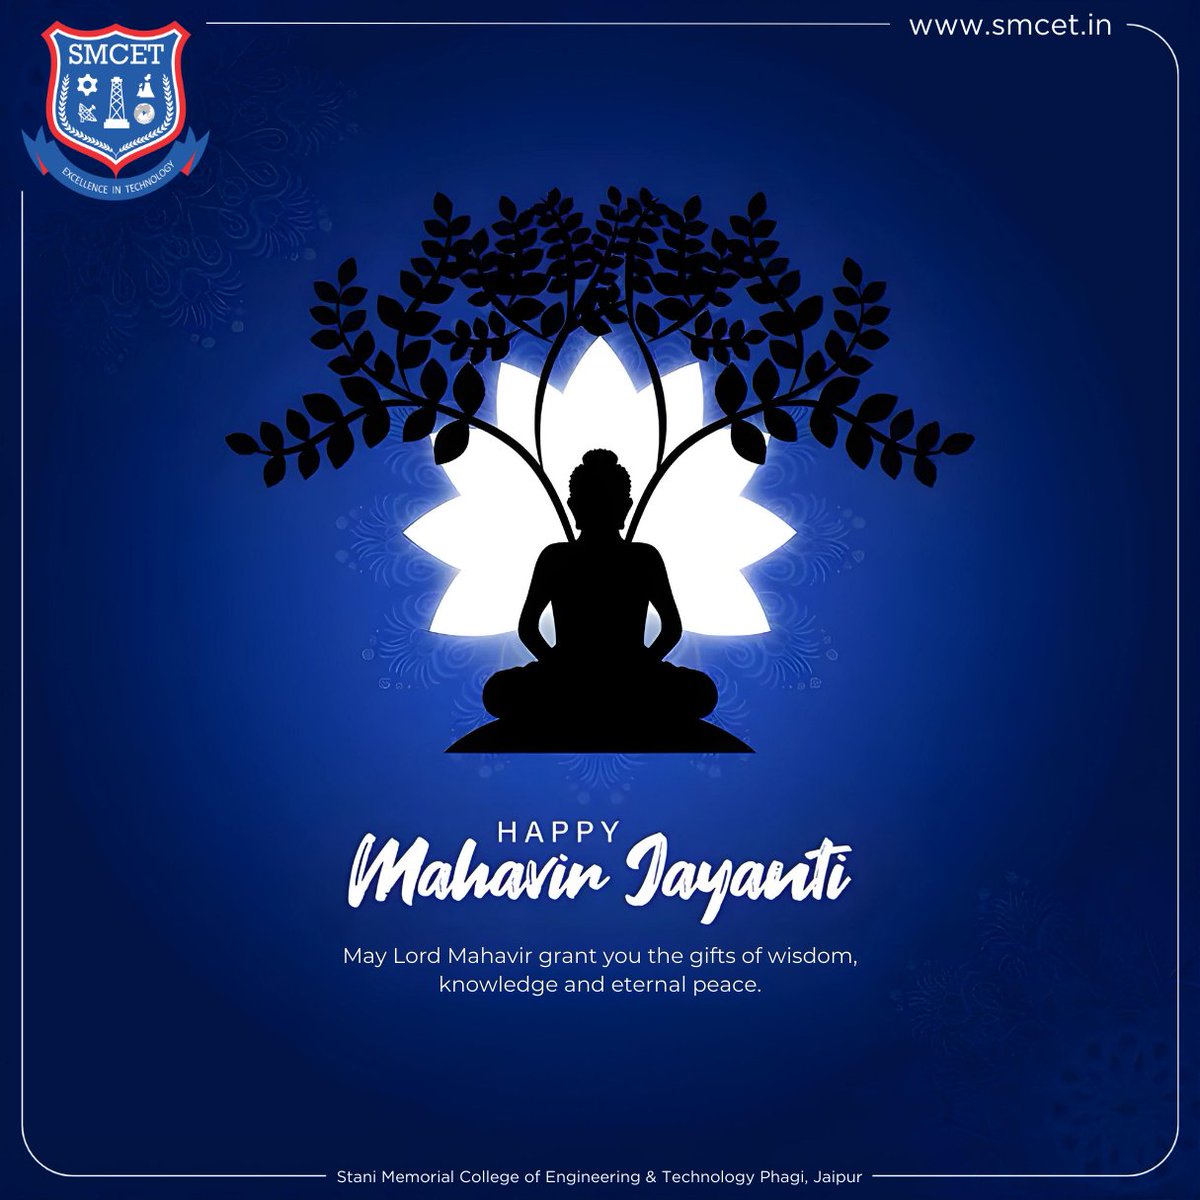 Little keys can open big locks.
Simple words can express great thoughts.
I hope my simple pray can make your life great
Happy Mahavir Jayanti.

#Mahavirjayanti2024 #bhagwanmahavir #mahavira #mahavirswami #SMCET